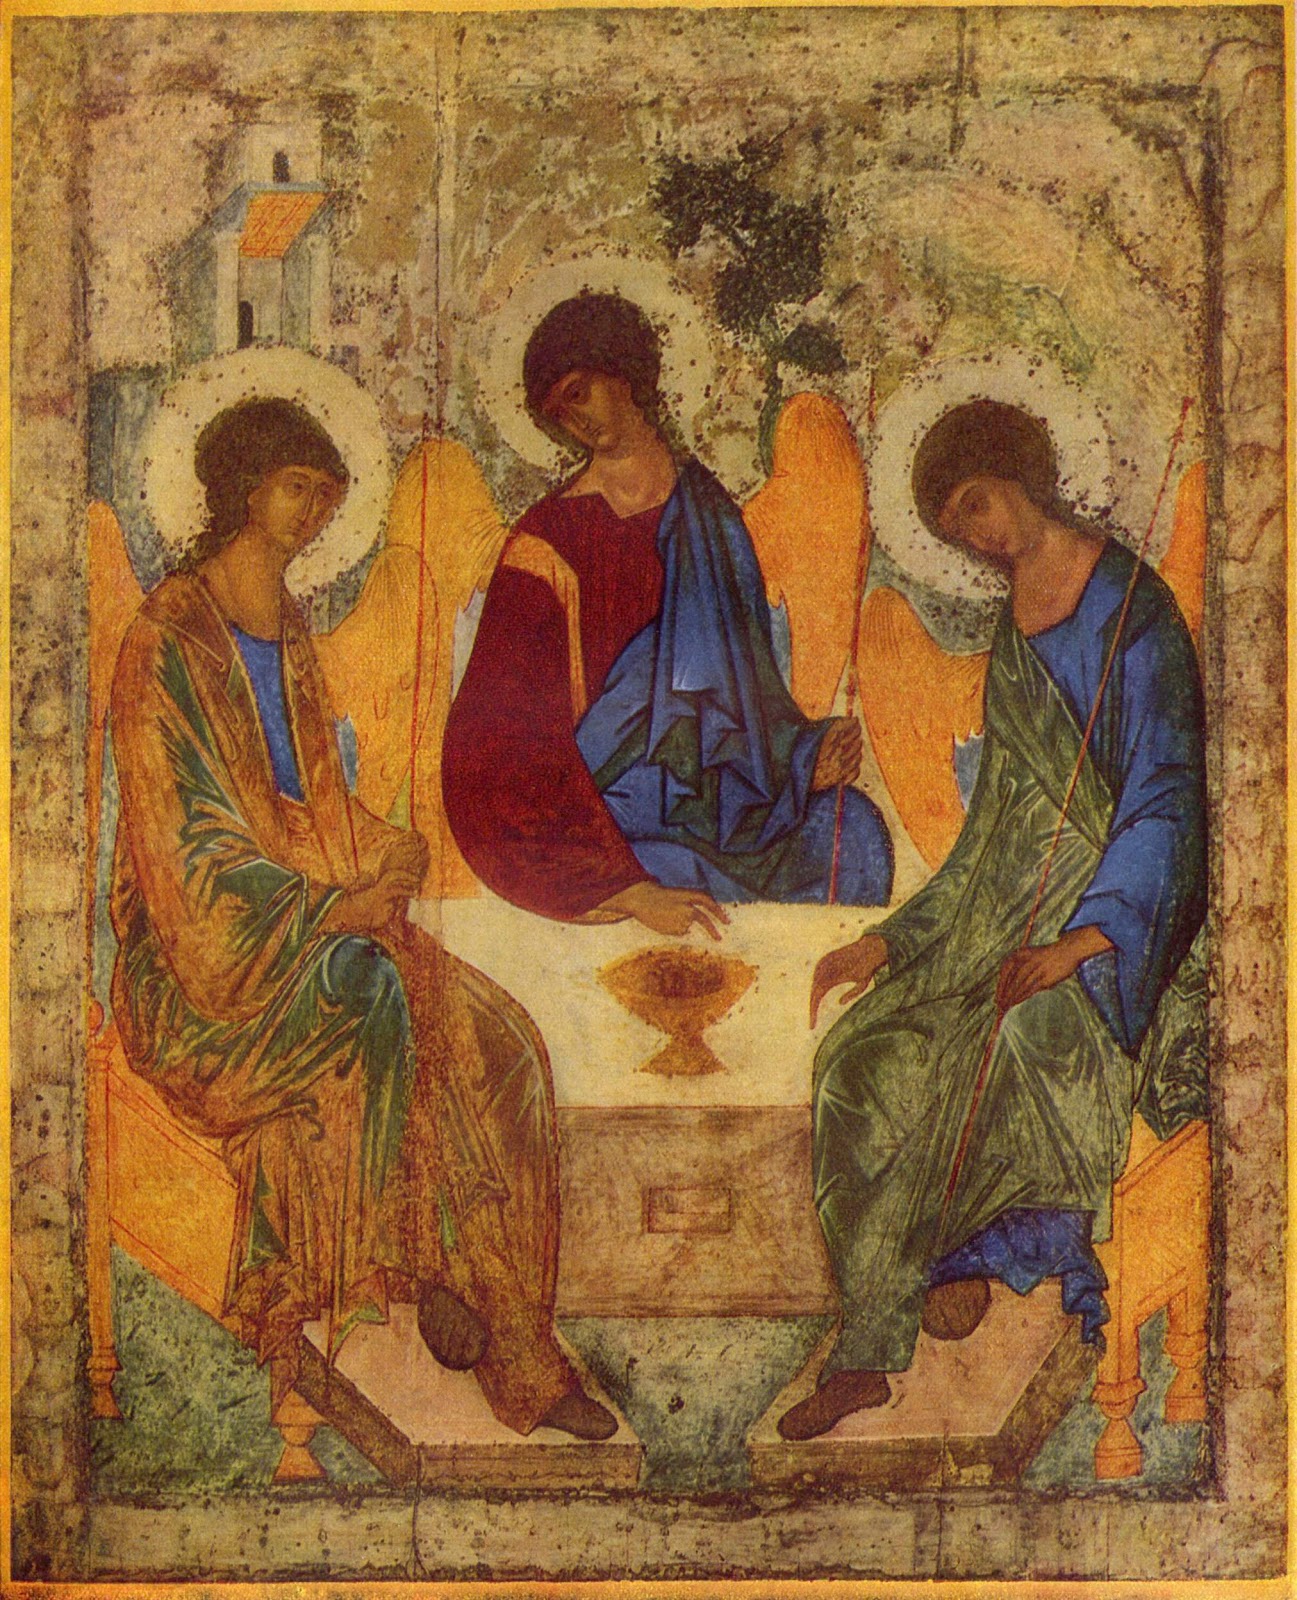 Andrei Rublev (1360–1430), The Holy Trinity - Rublev